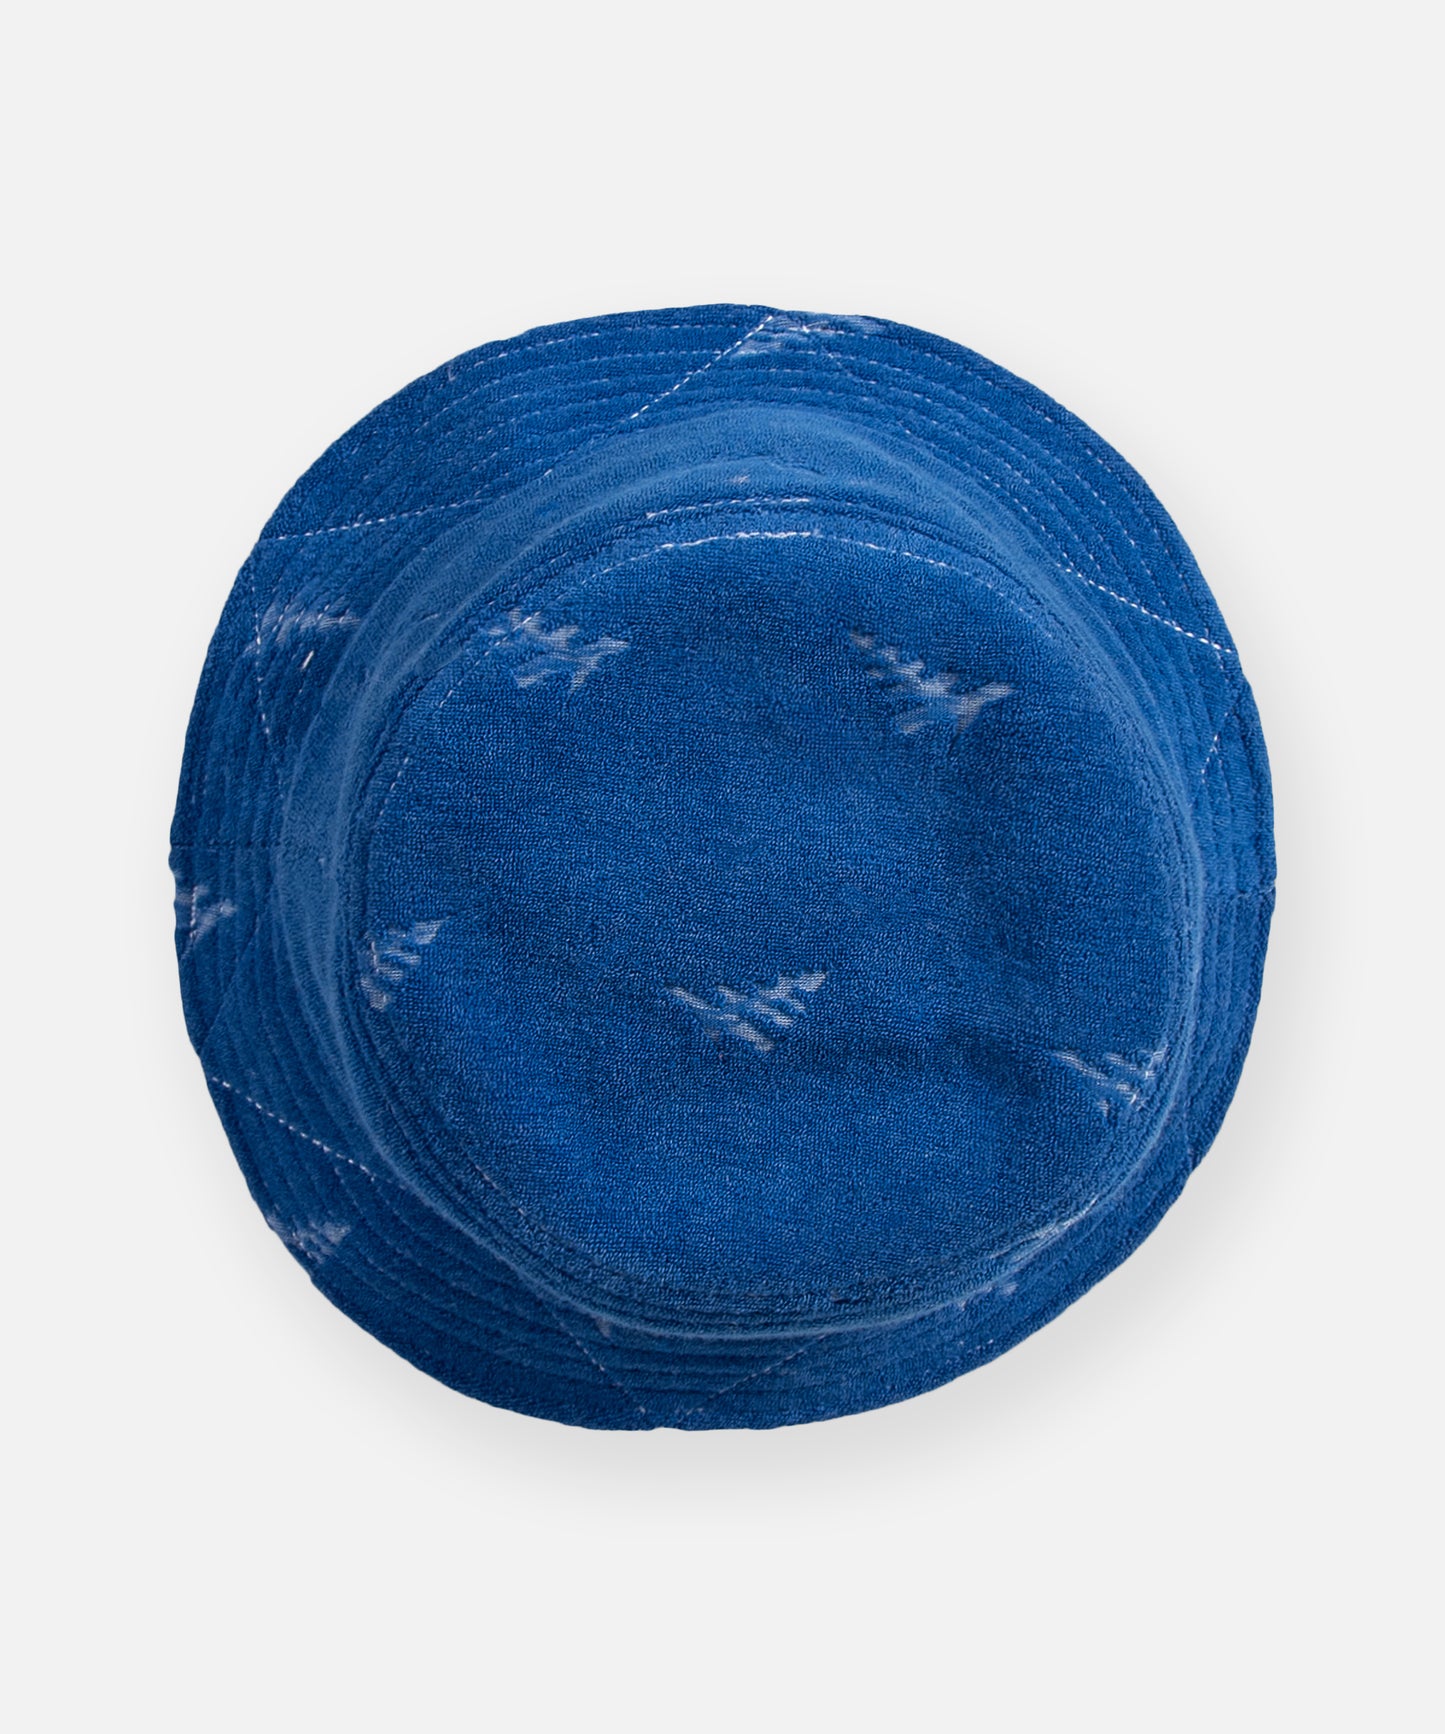 CUSTOM_ALT_TEXT: Top view of Paper Planes Jacquard Terry Cloth Bucket Hat color Nautical Blue.